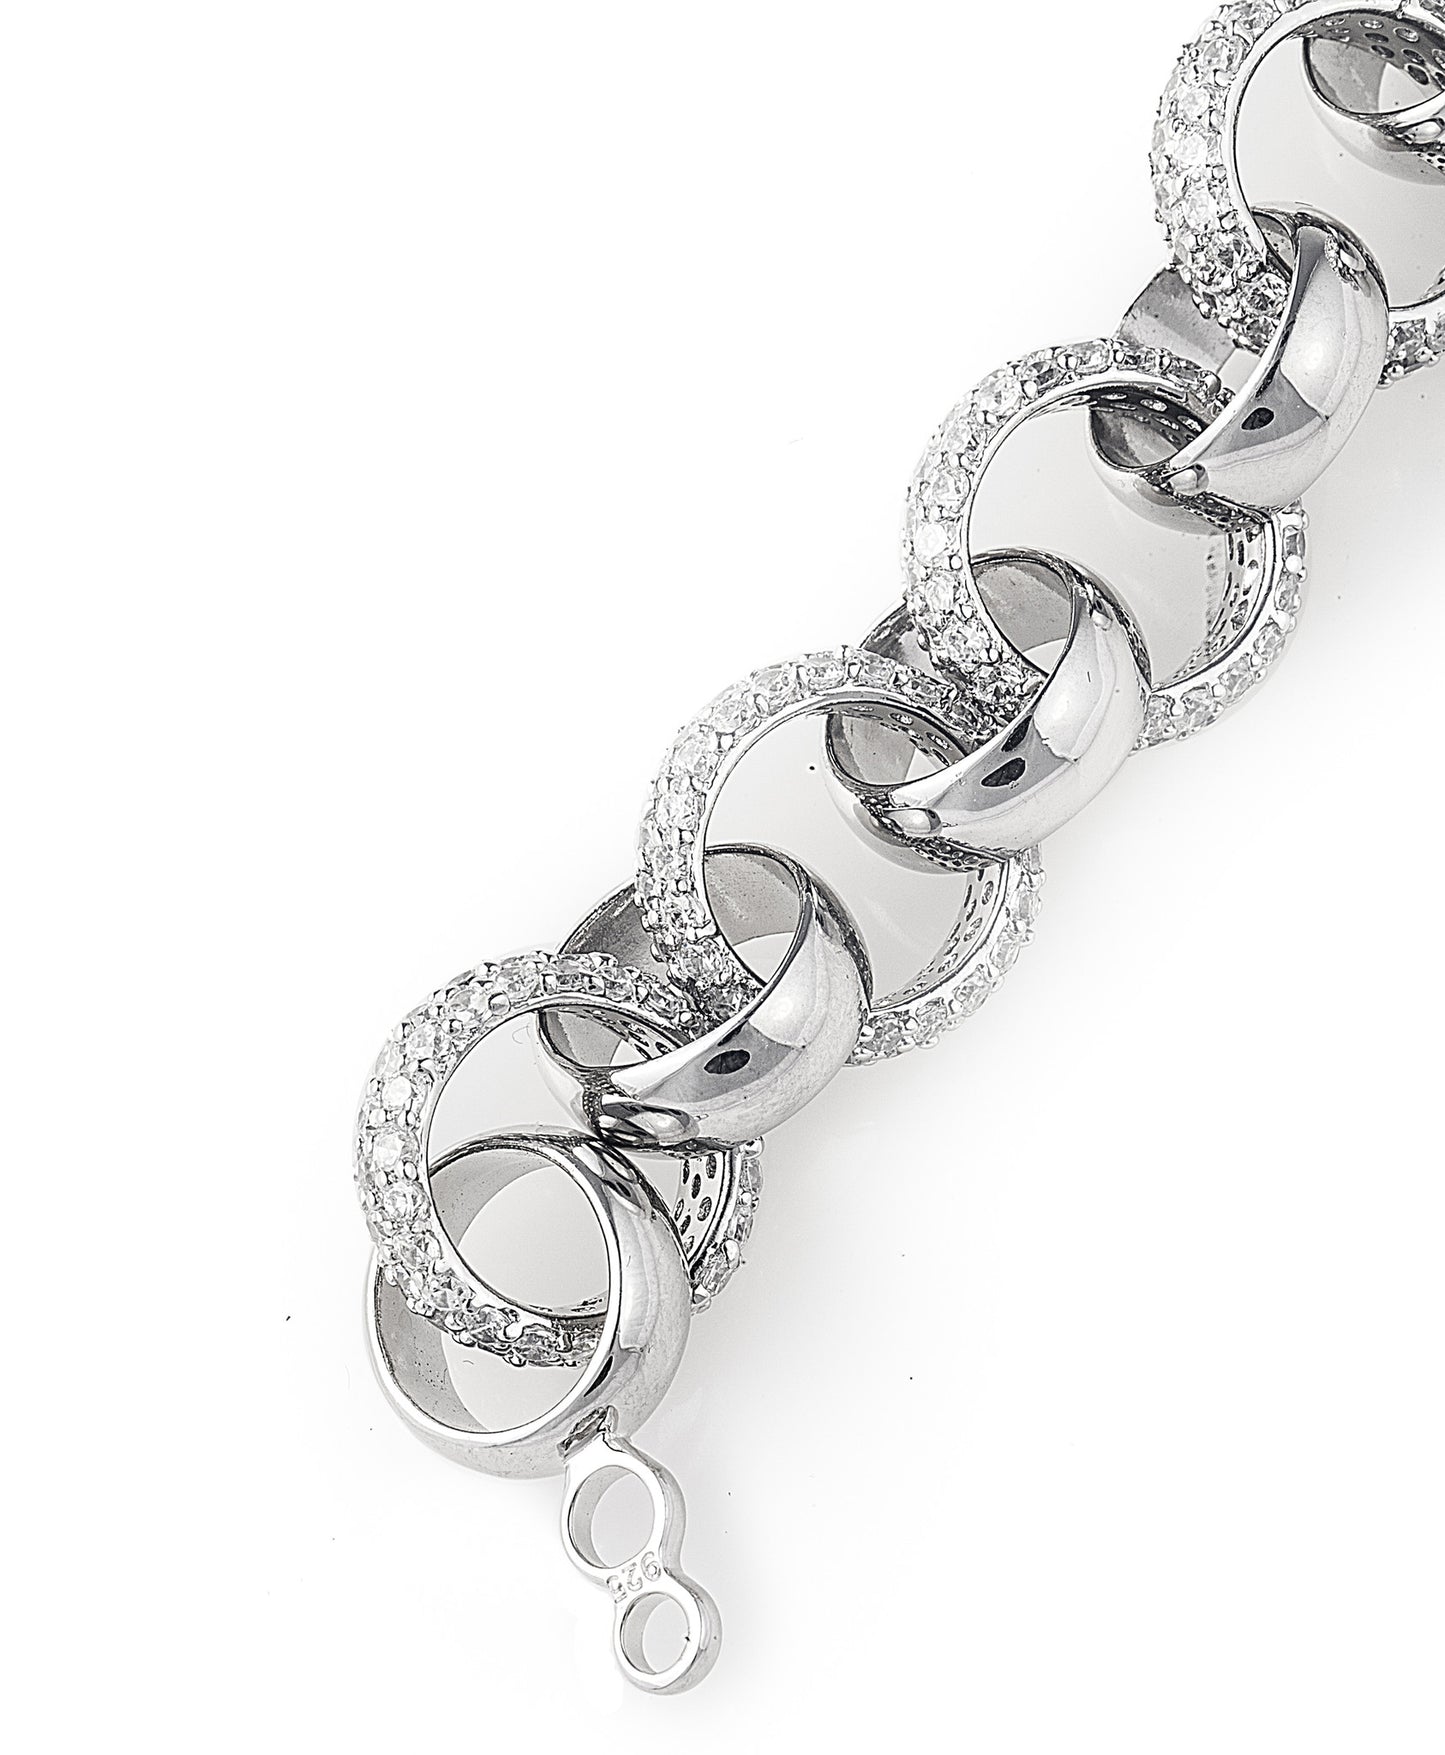 Bachi Bling Bracelet, a chunky 925 sterling silver belcher bracelet encrusted with pave set cubic zirconia stones. Worldwide shipping from Melbourne Australia.